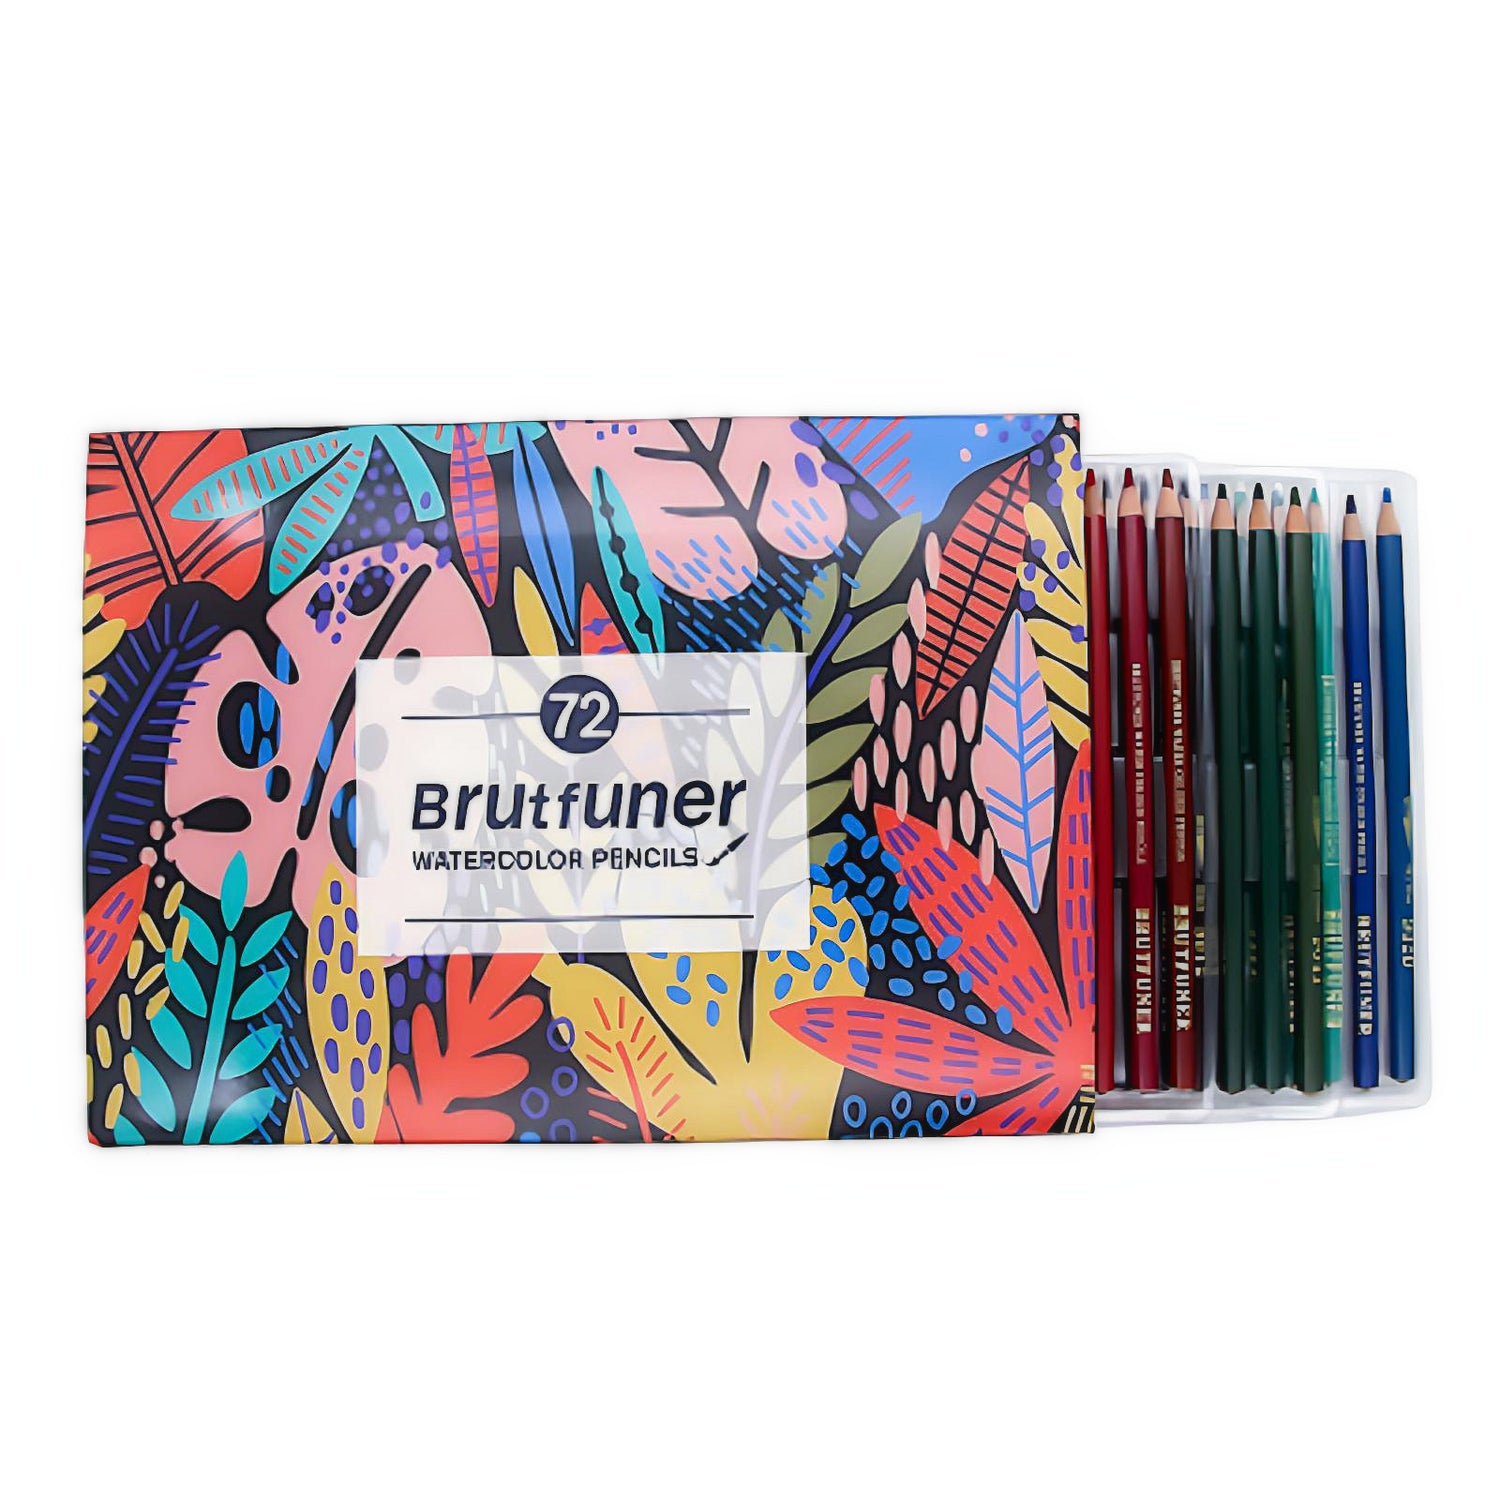 a 72 set of Brutfuner watercolor pencils on a white background